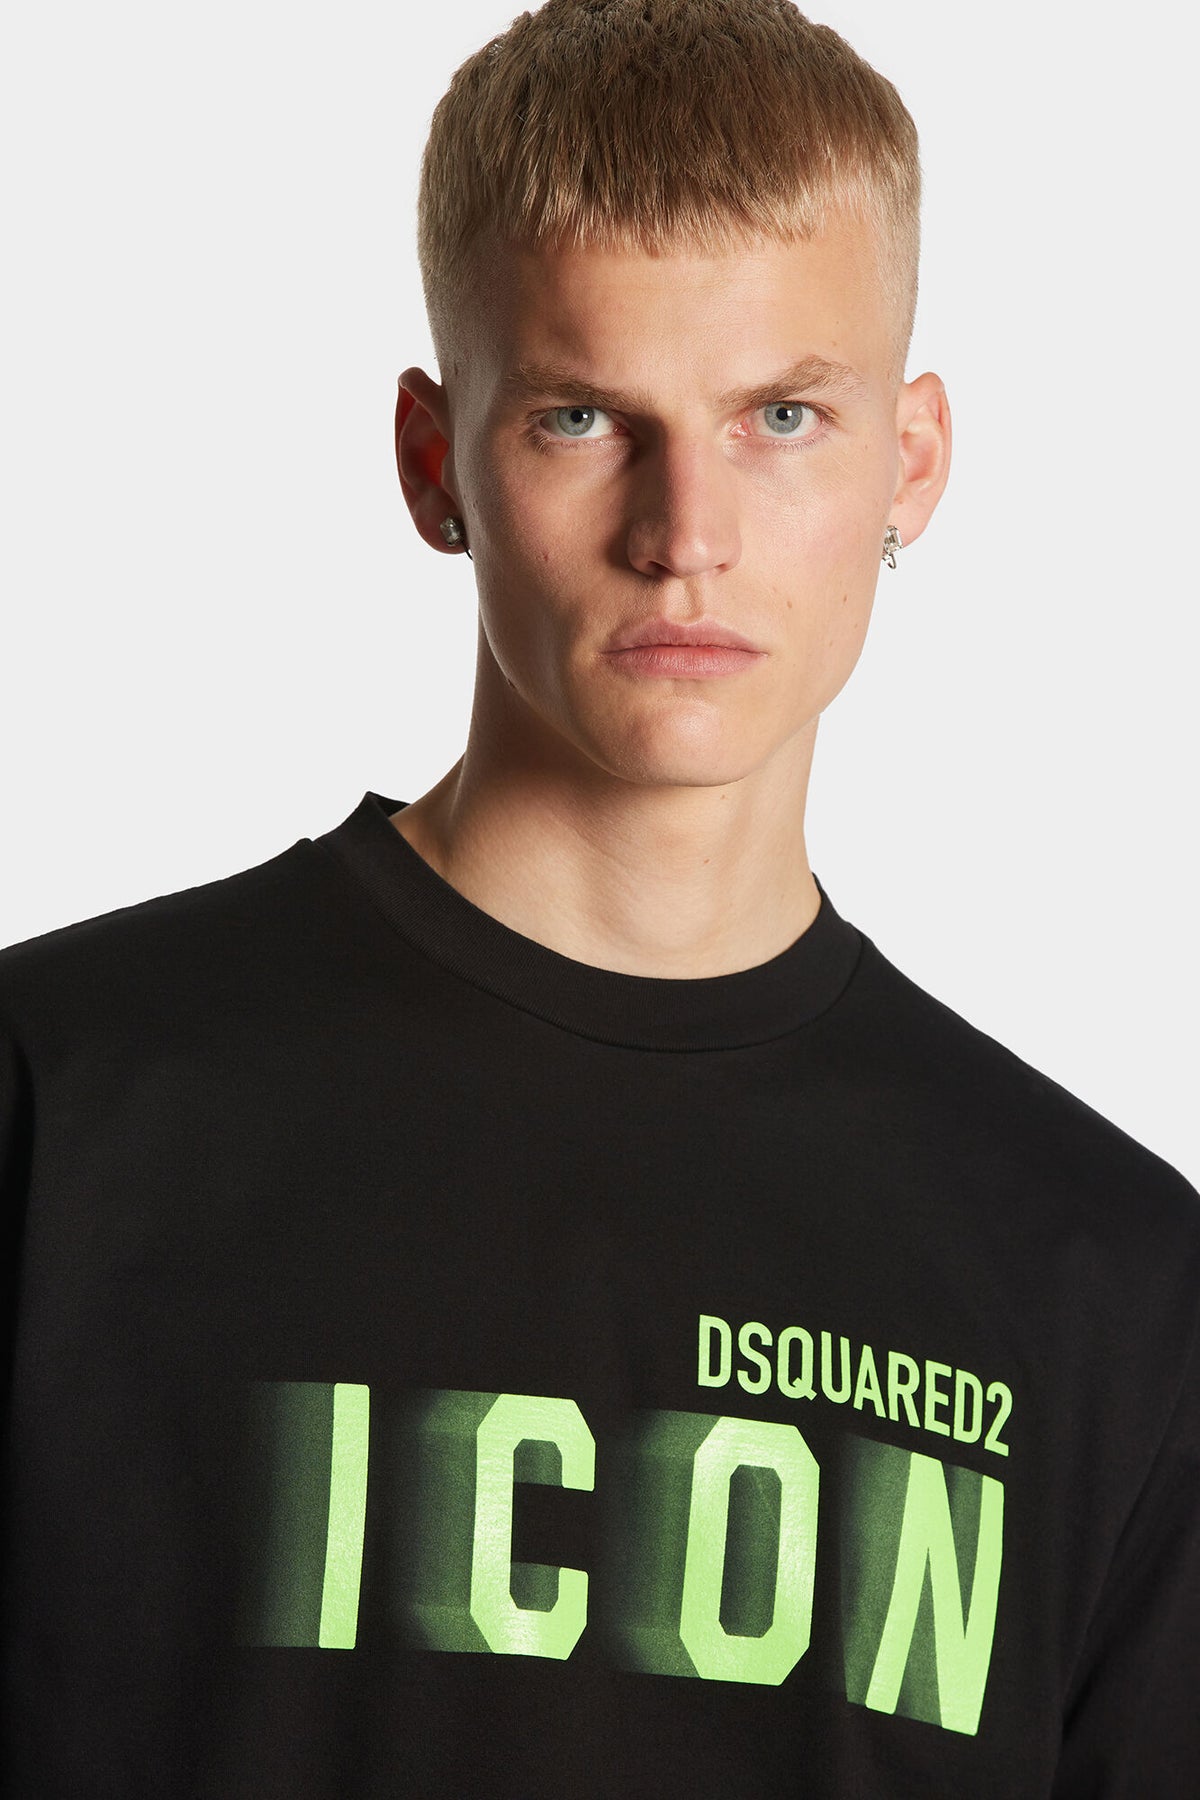 ICON BLUR LOOSE FIT T-SHIRT